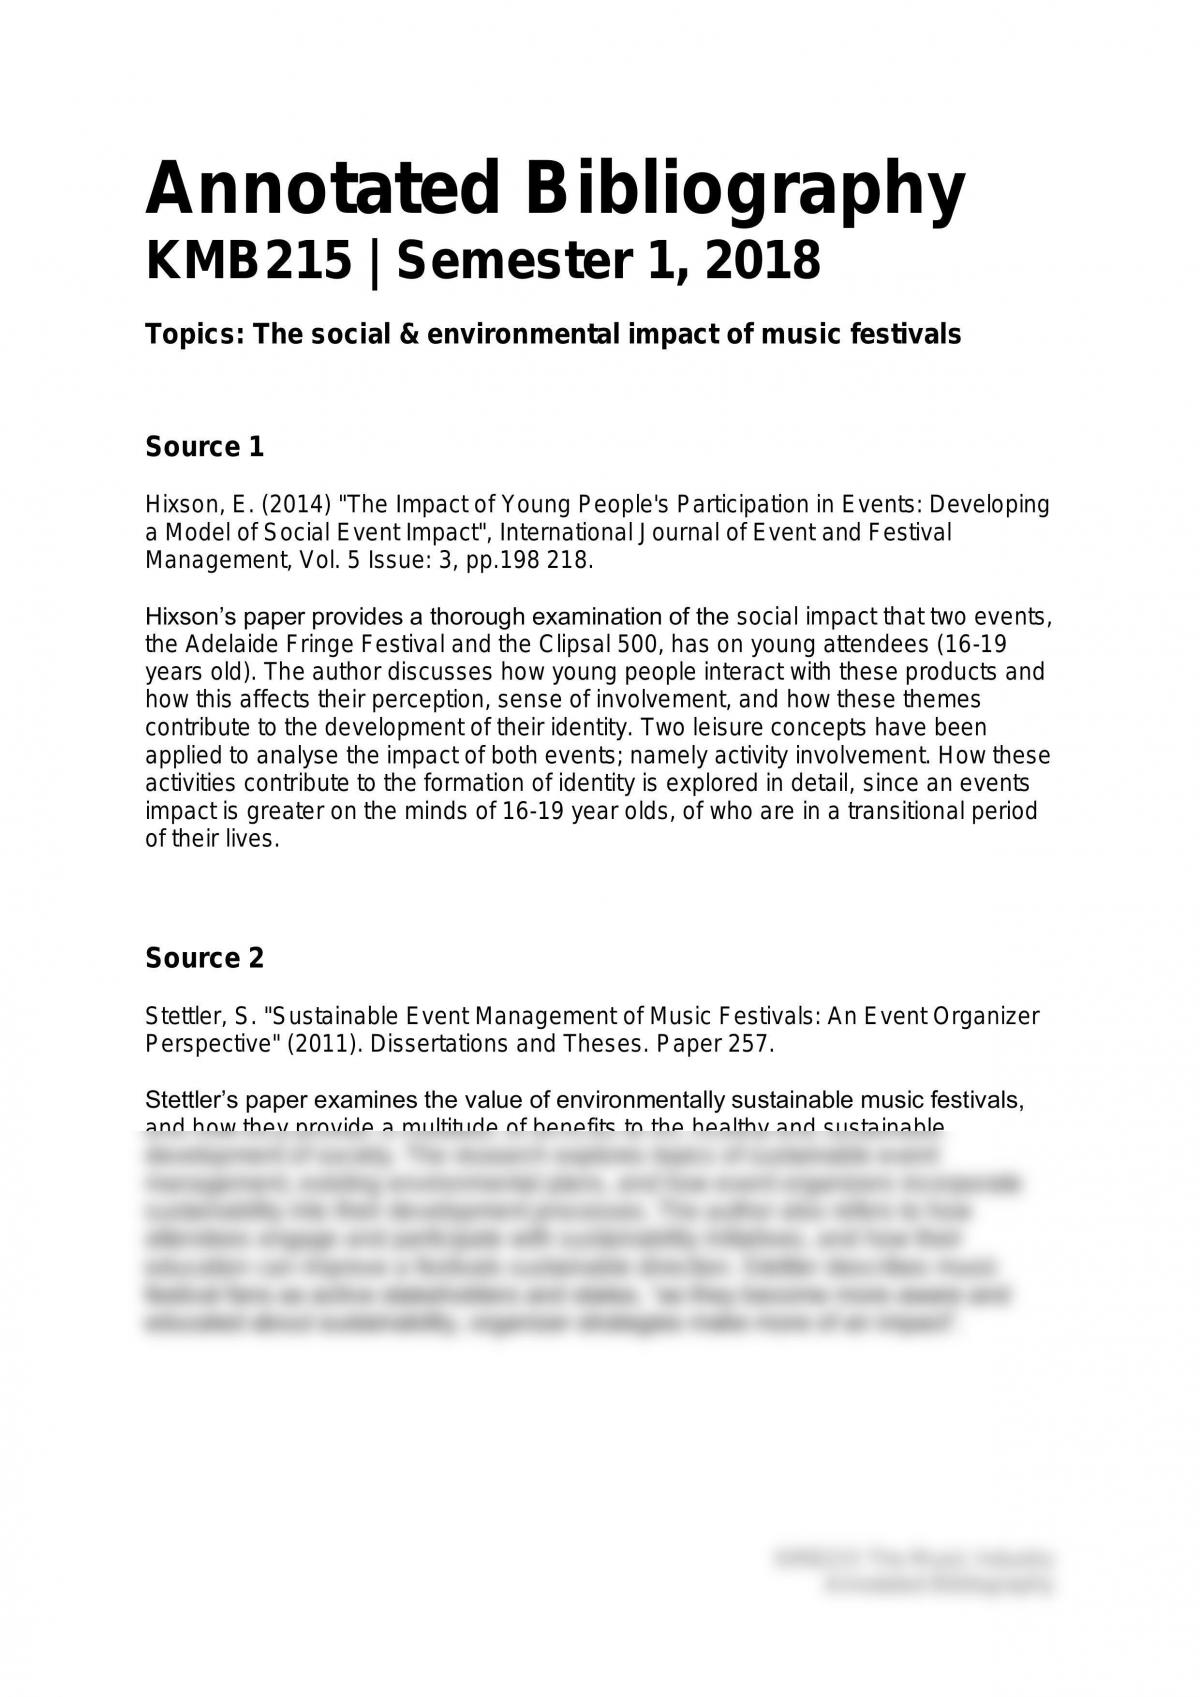 KMB215 The Music Industry Annotated Bibliography - Page 1